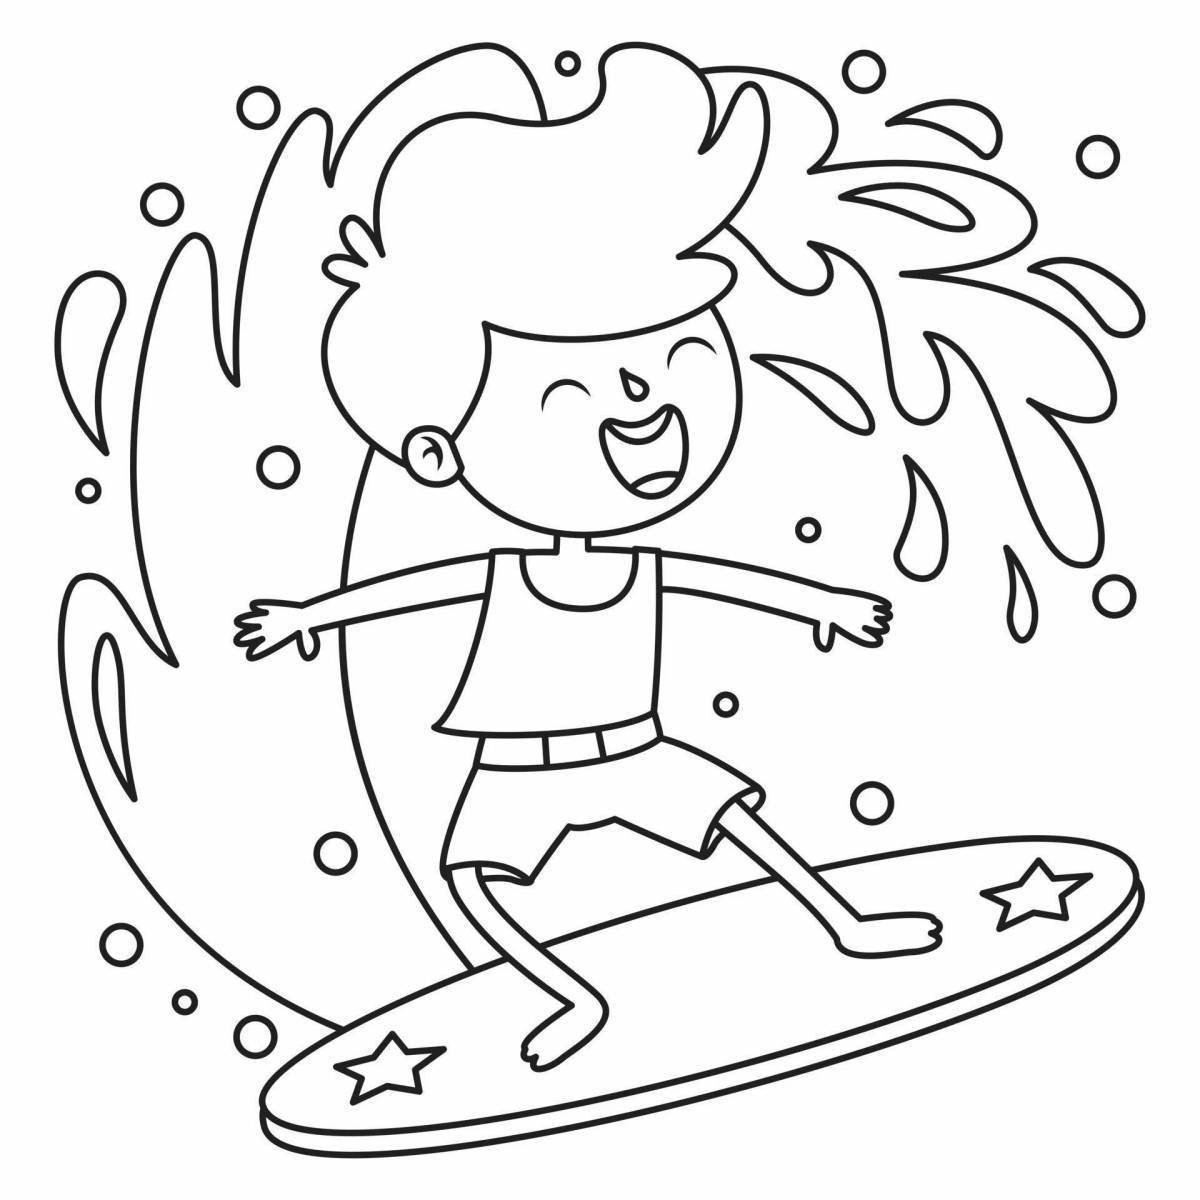 Coloring page energetic surfing